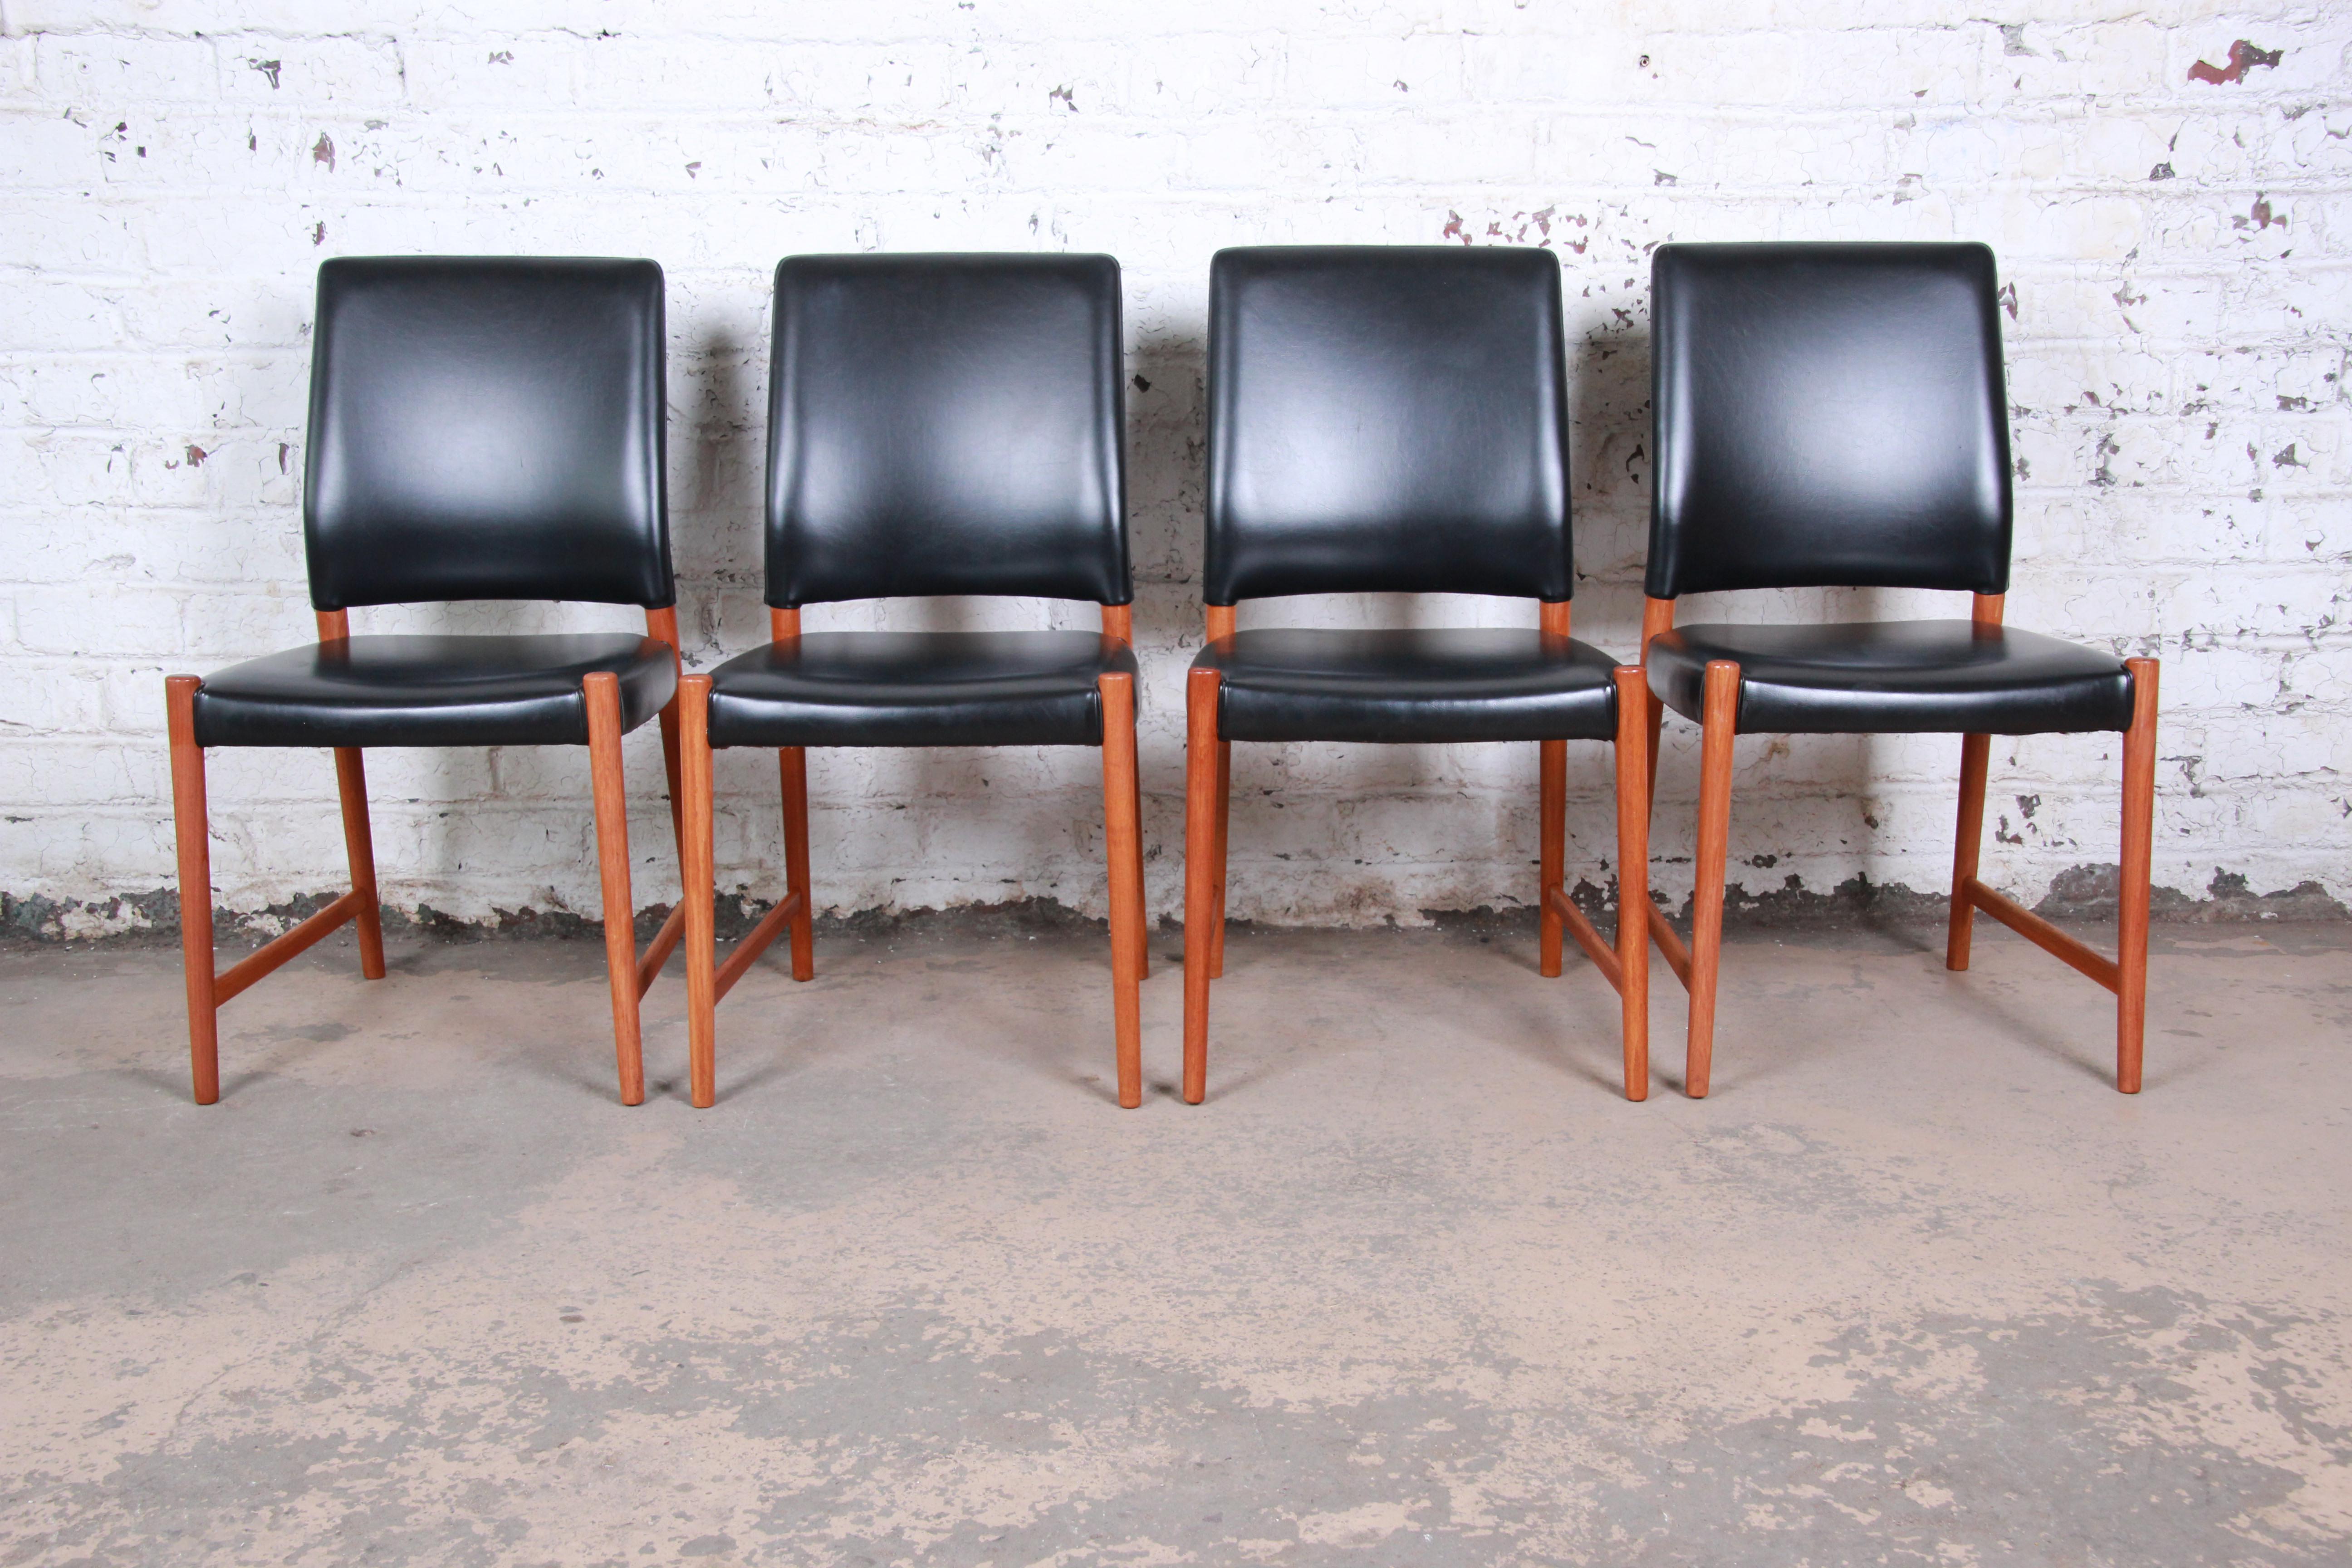 A gorgeous set of four midcentury Danish modern dining chairs designed by Torbjorn Afdal for Nesjestranda Møbelfabrik of Norway. The chairs feature solid teak frames and beautiful black leather upholstery. Stamped 